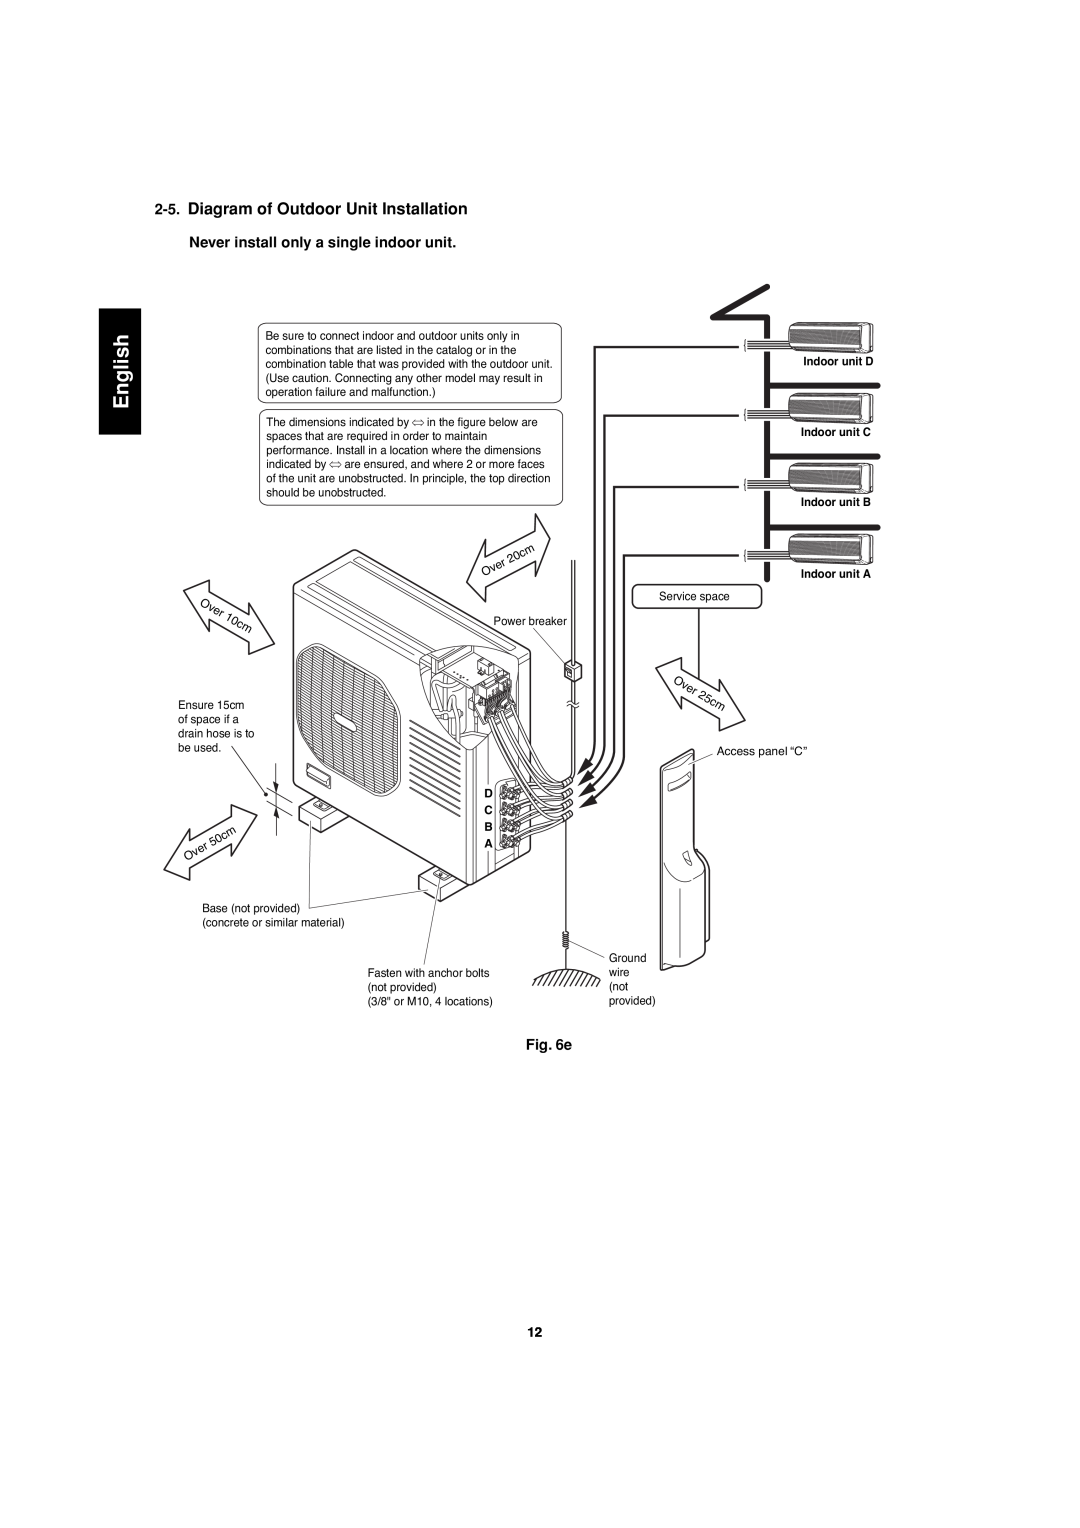 Sanyo SAP-CMRV1426EH-F English, Diagram of Outdoor Unit Installation, Never install only a single indoor unit 